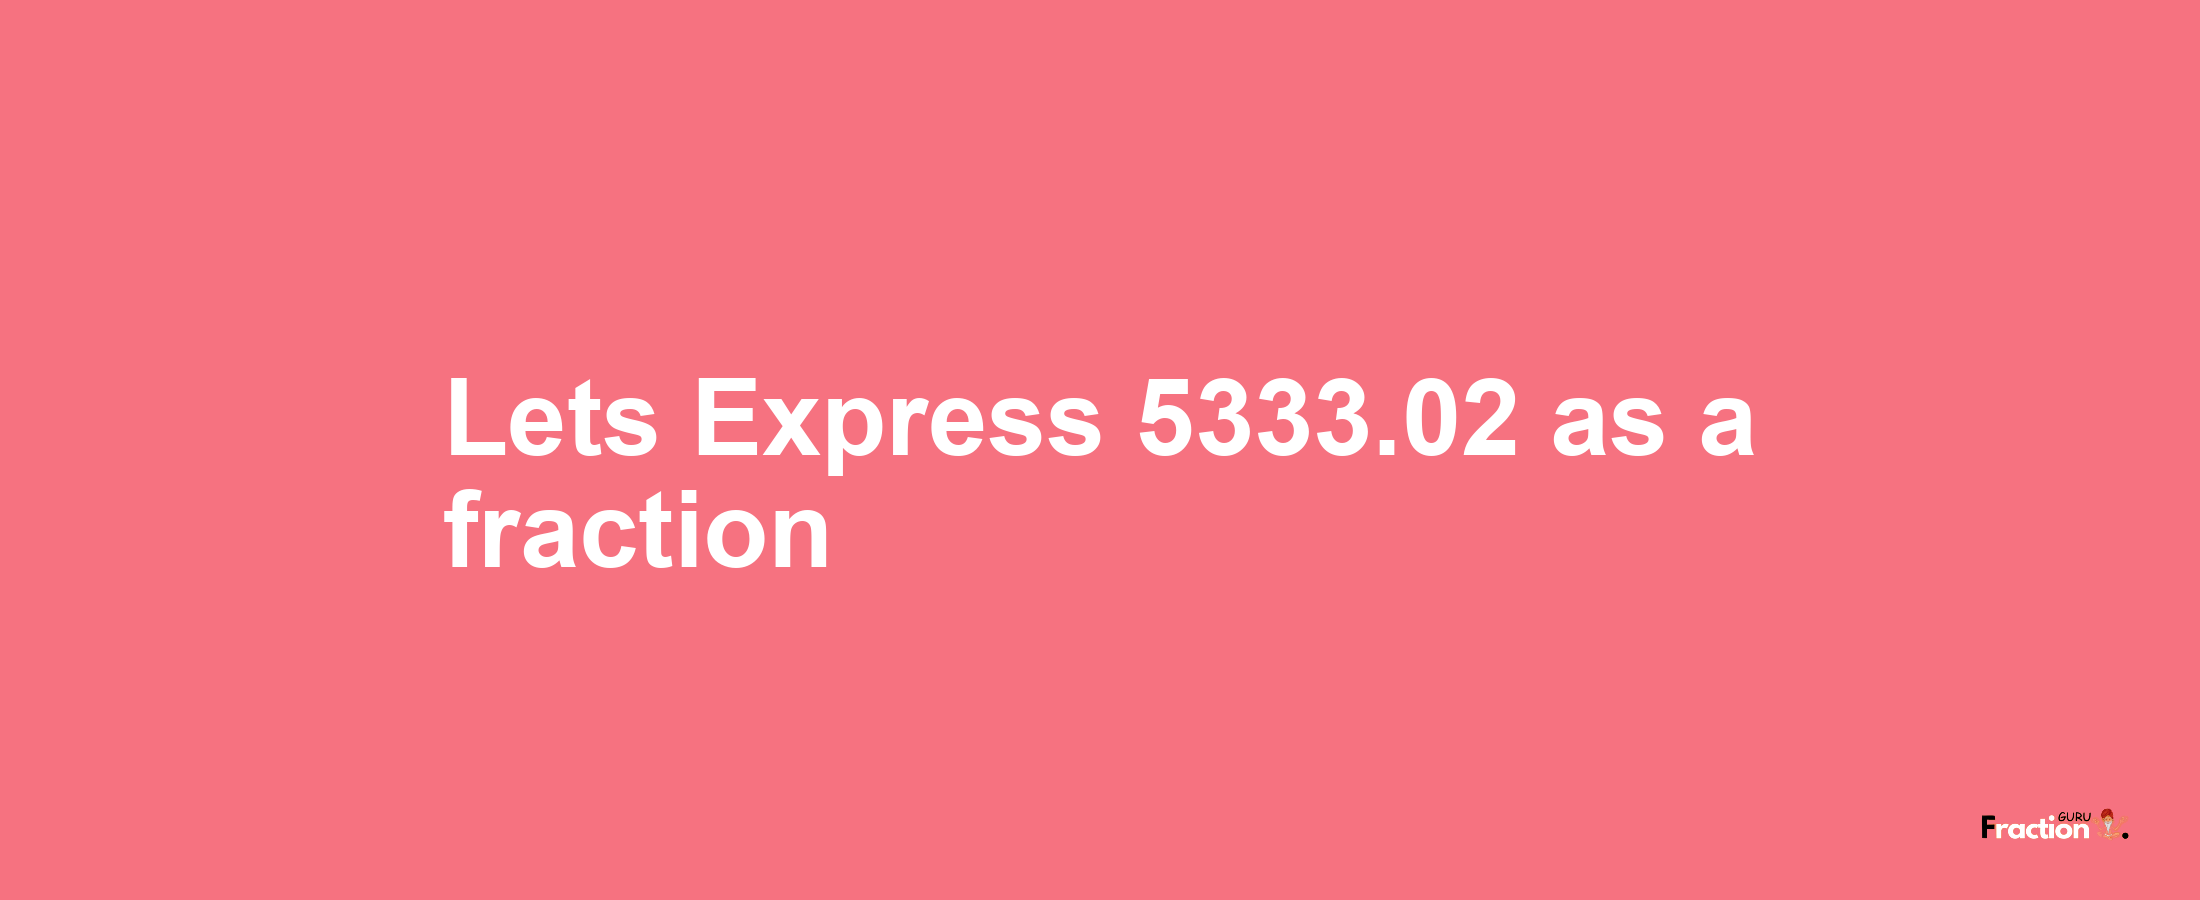 Lets Express 5333.02 as afraction